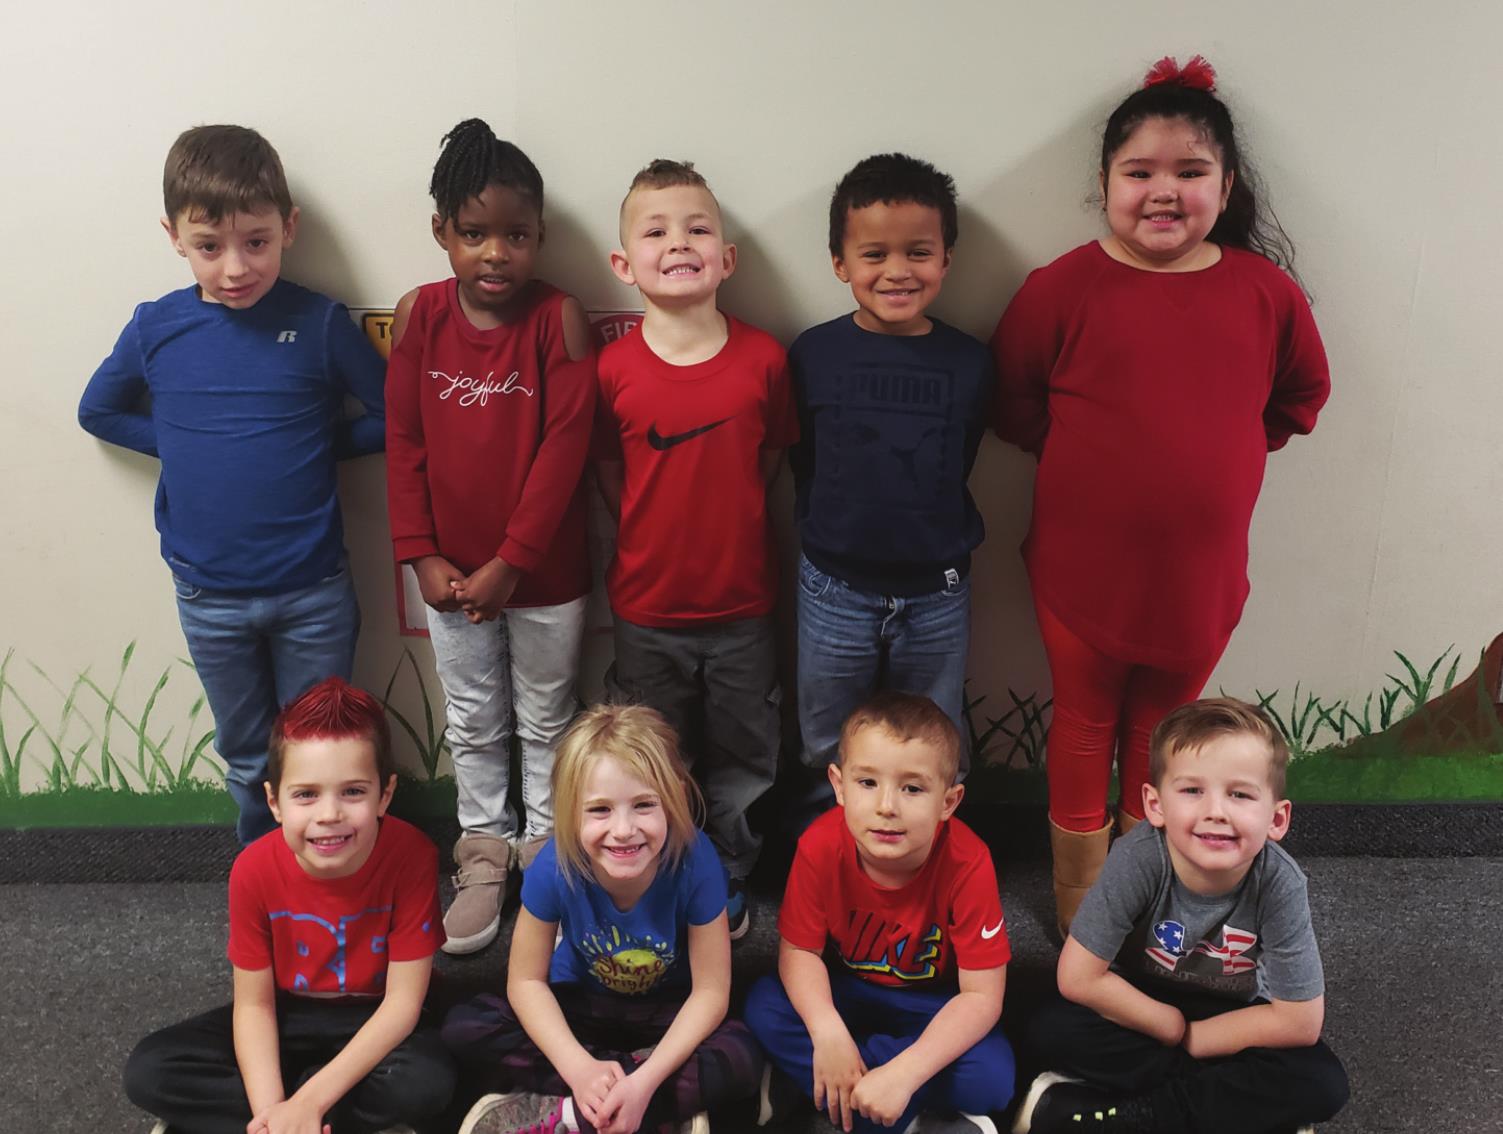 Pictured are members of Theresa Beck’s PM Pre-K class who wore red and blue Thursday. Front row from left is Aiden Sexton, Taylor Moran, Jaxon Raizola, Reed Yount. Back row is Layne Collins, Carringtyn Anderson, Evan Fuller, Louis Williams and Yarethzy Juarez. Leanna Cook/WDN